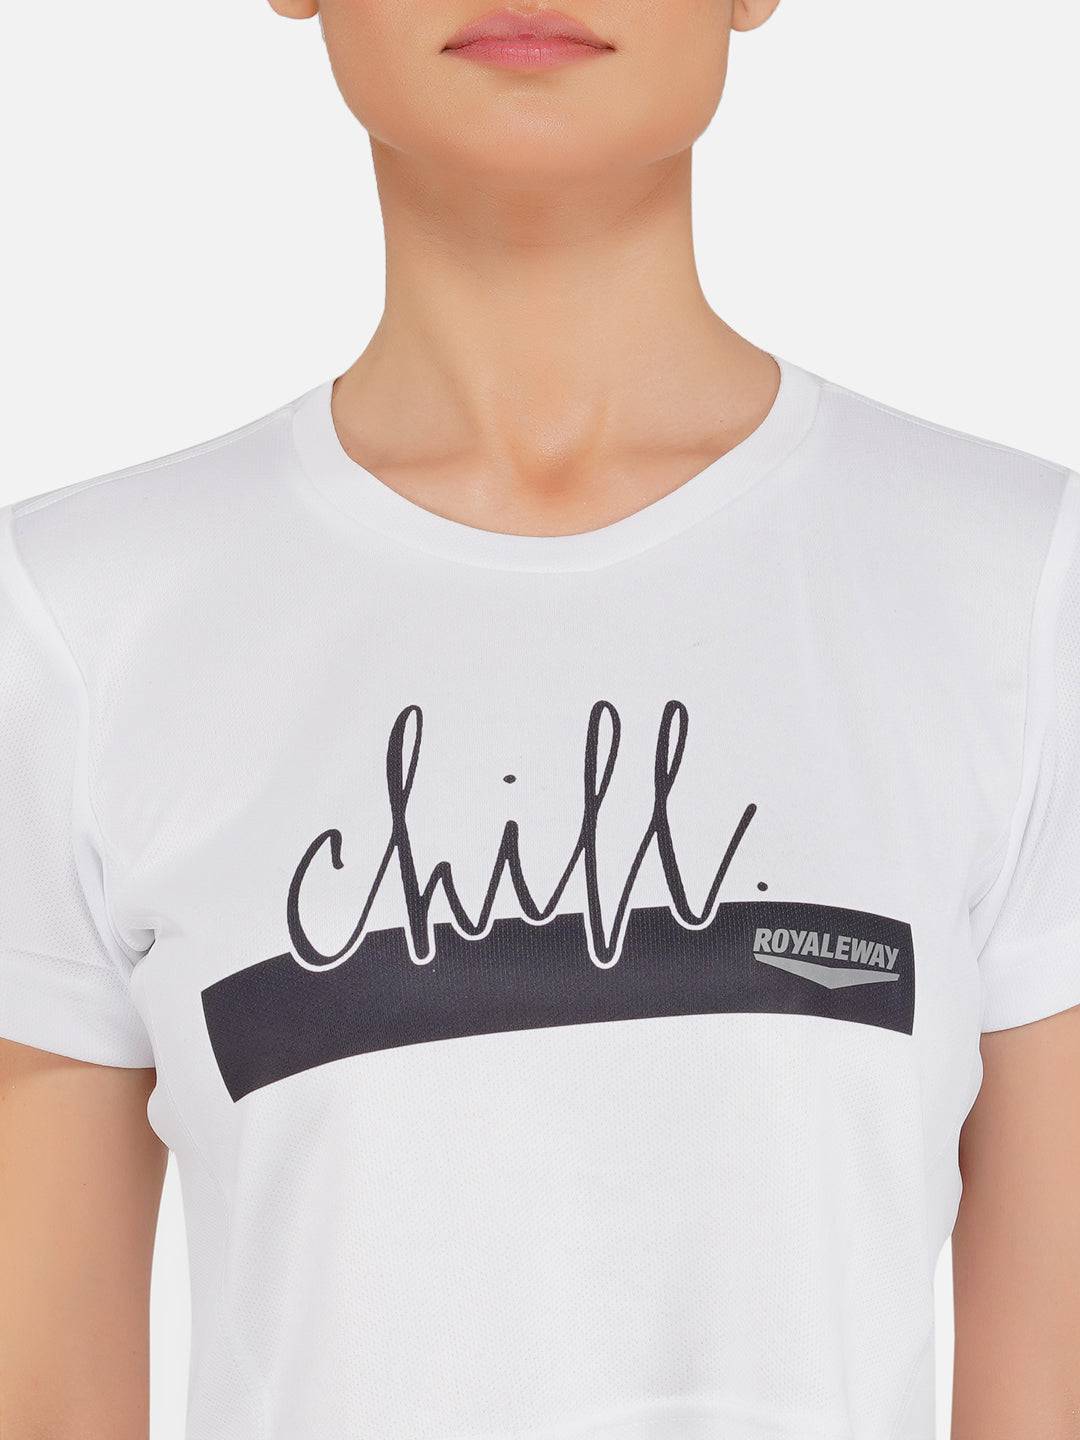 LONG BACK CROP TOP CHILL WHITE RWW2035